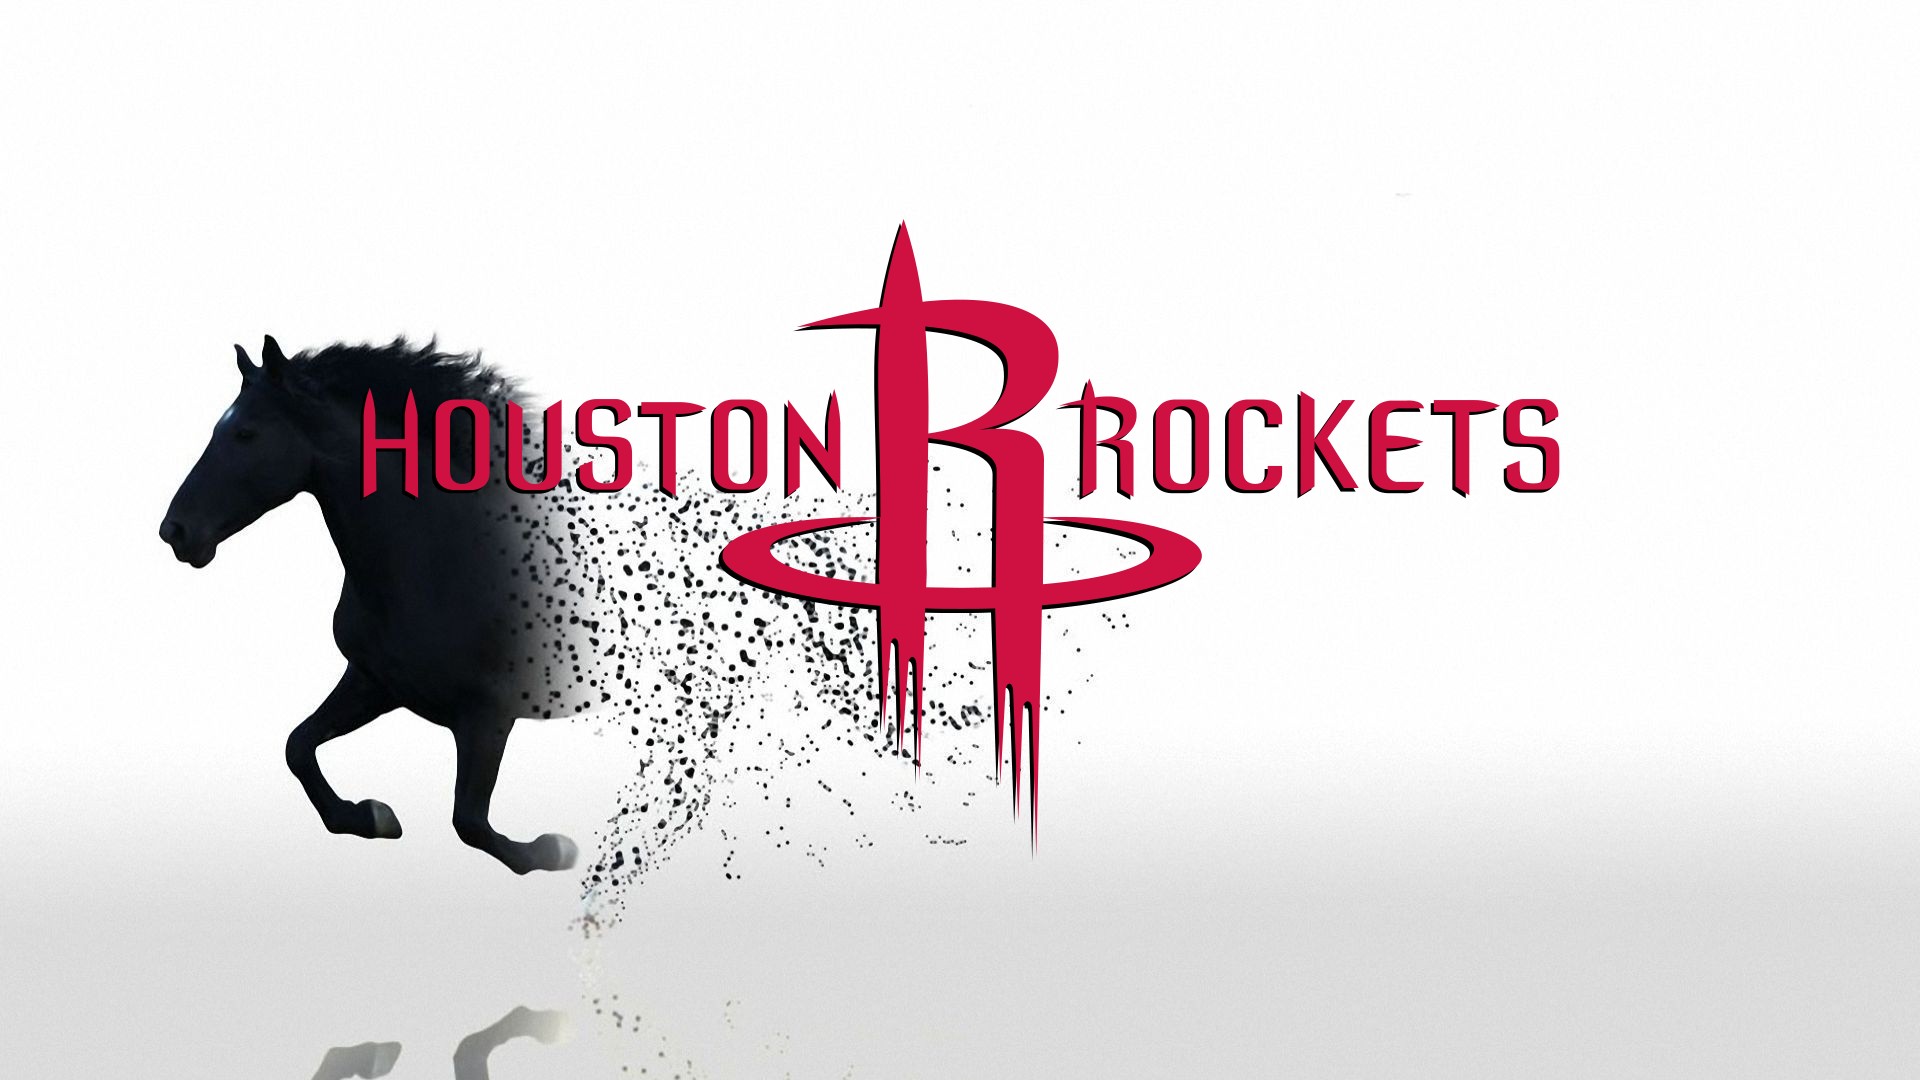 Houston Basketball Mac Backgrounds with image dimensions 1920x1080 pixel. You can make this wallpaper for your Desktop Computer Backgrounds, Windows or Mac Screensavers, iPhone Lock screen, Tablet or Android and another Mobile Phone device